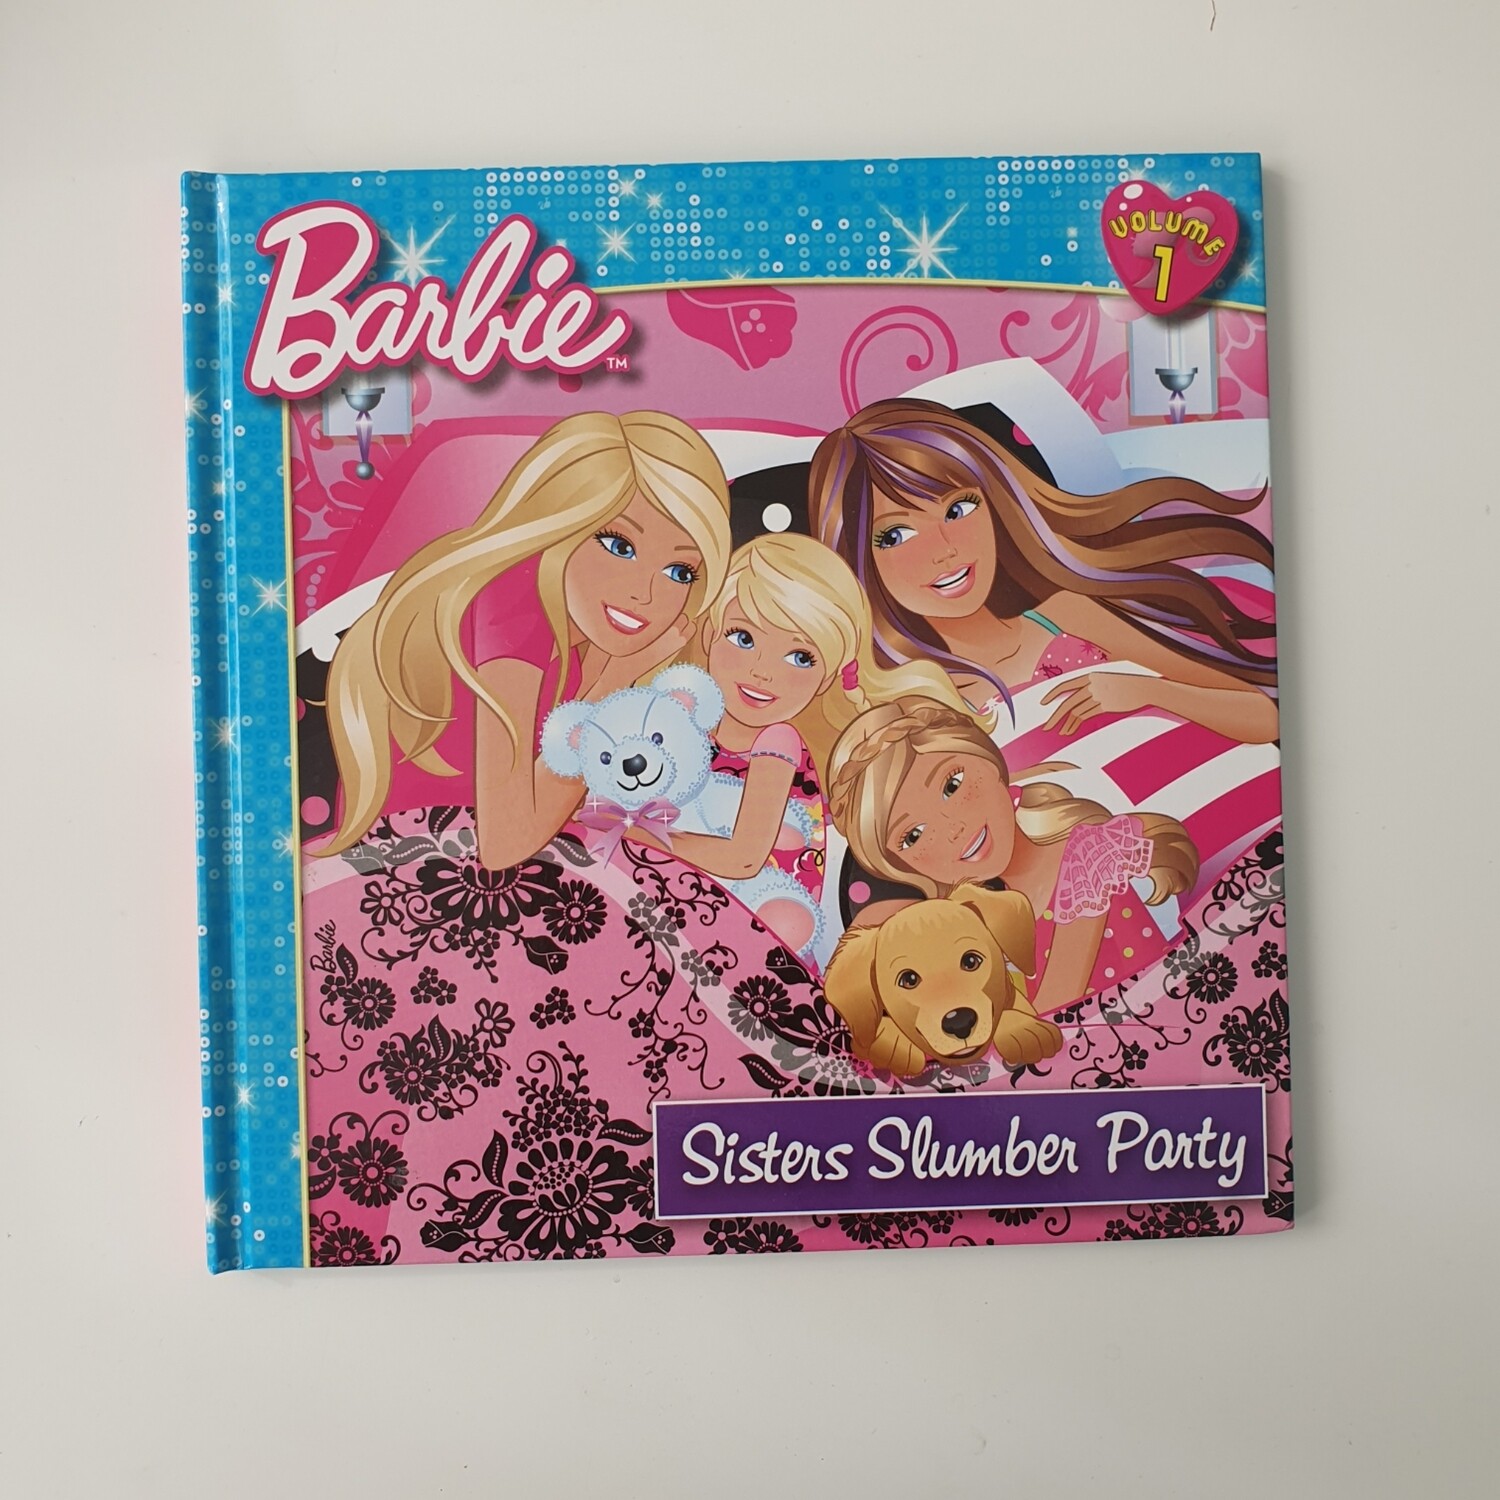 Barbie Sisters Slumber Party Notebook - no original book pages